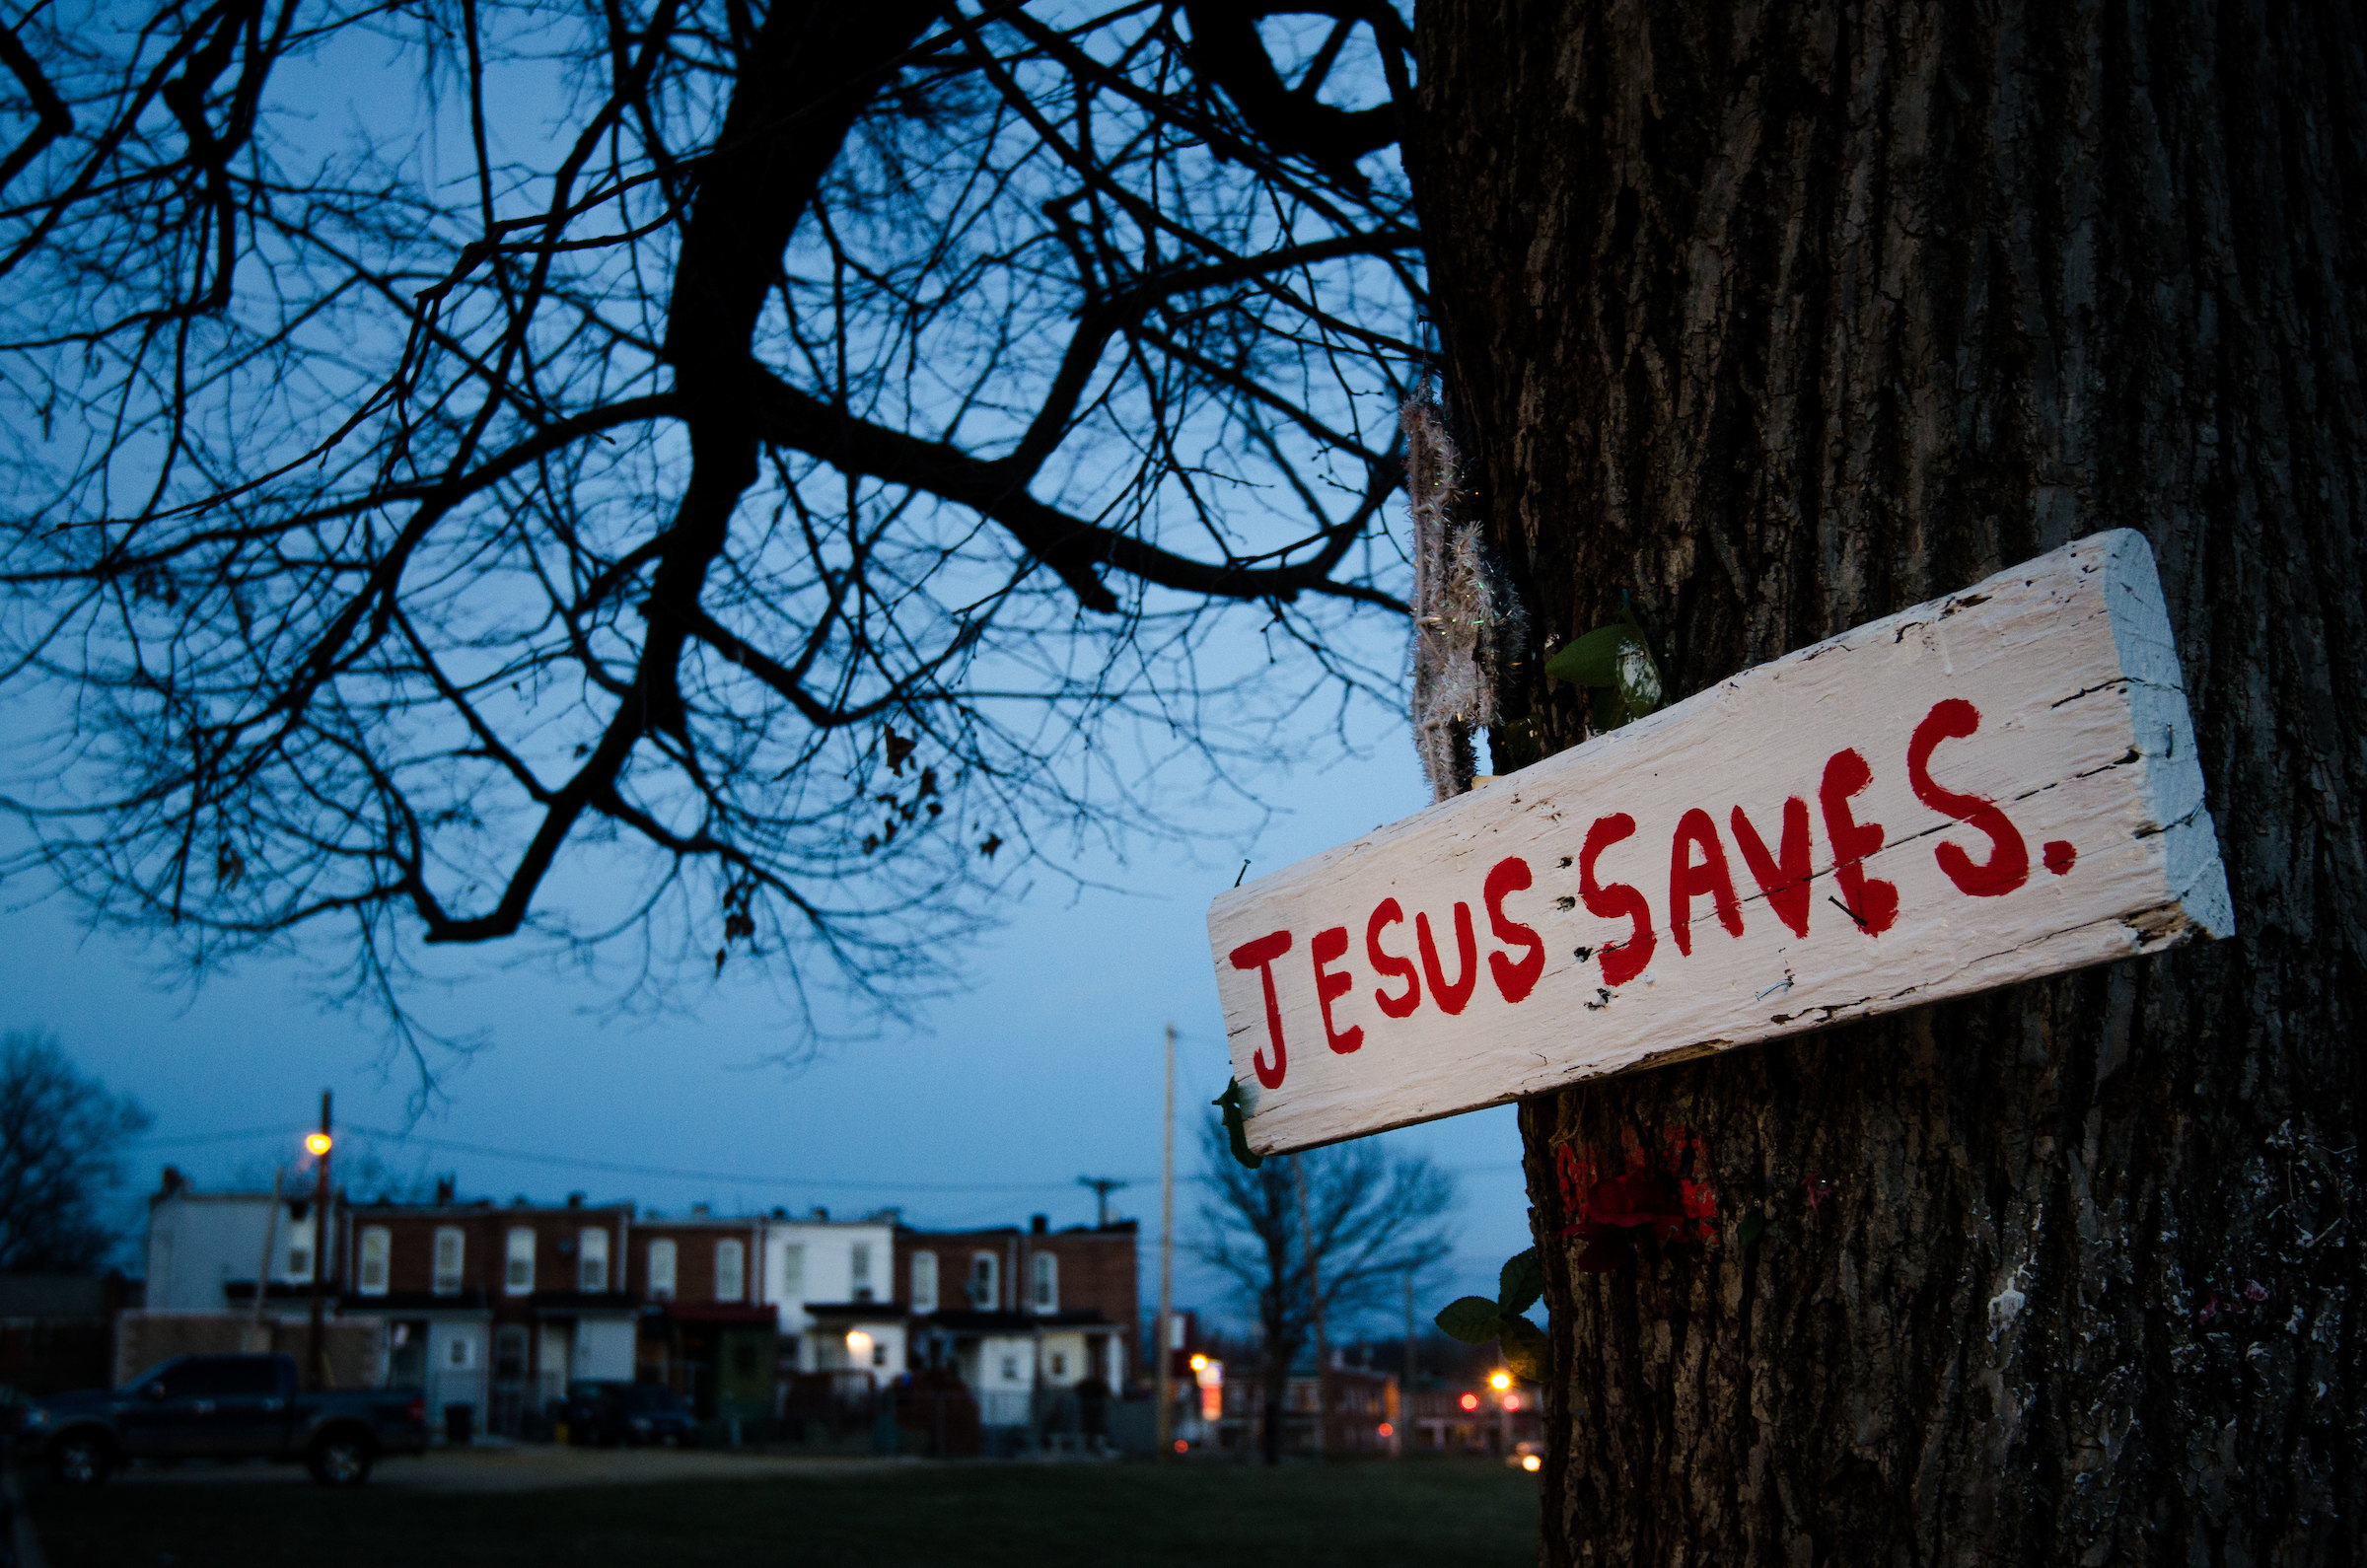 A sign nailed to a tree punctuates the dusk Thursday, March27, 2014, outside a neighborhood in Baltimore, Md. LCMS Communications/Erik M. Lunsford